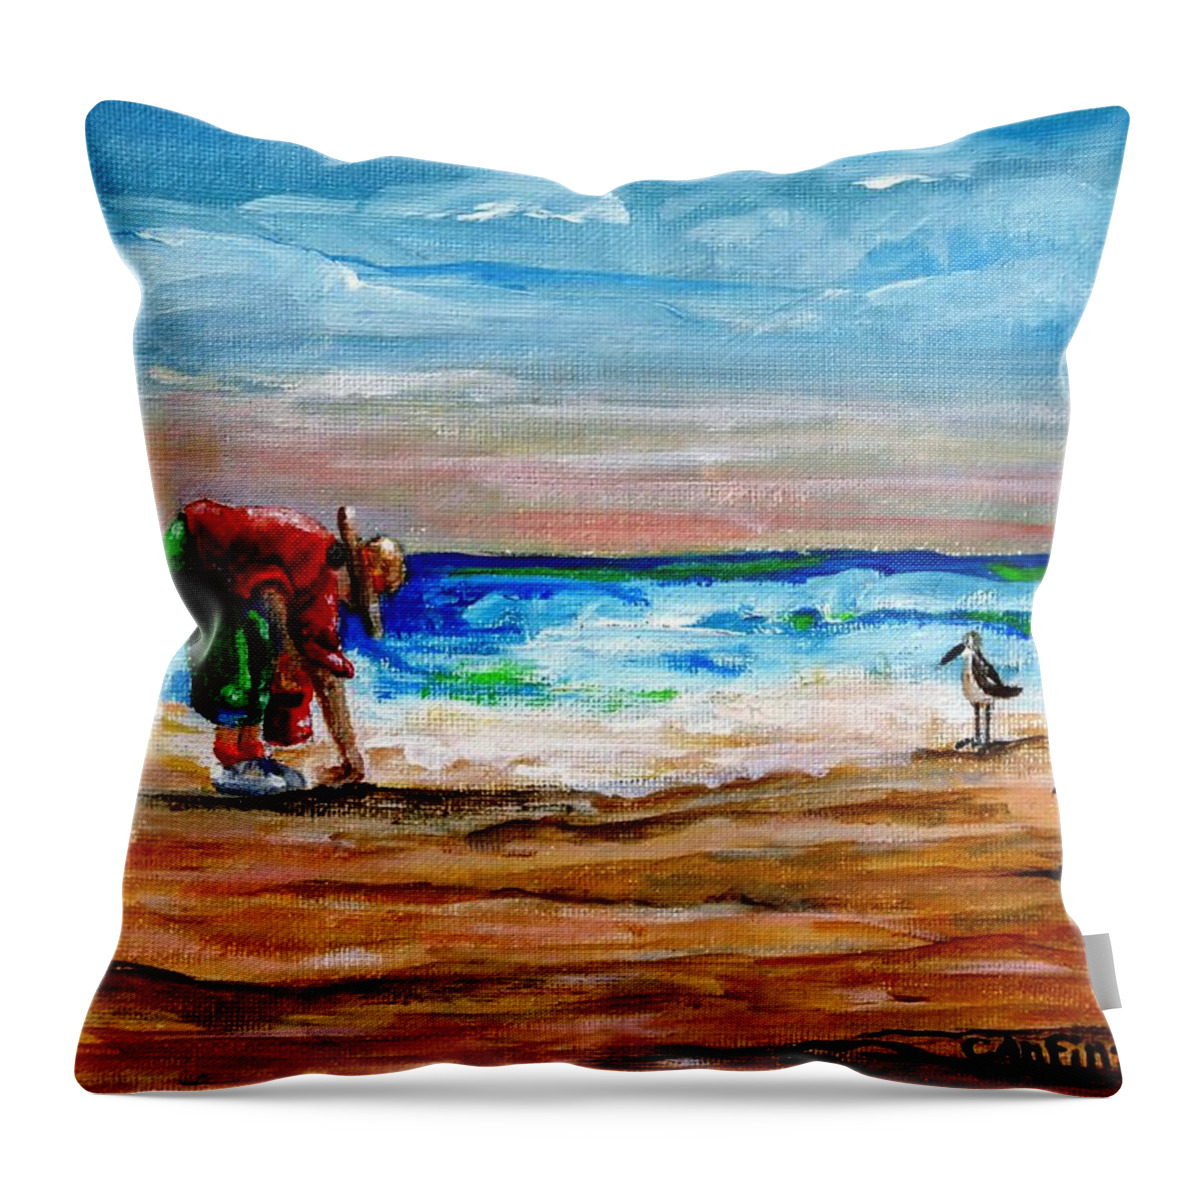 Shells Throw Pillow featuring the painting Seashells by the Seashore by Carol Allen Anfinsen